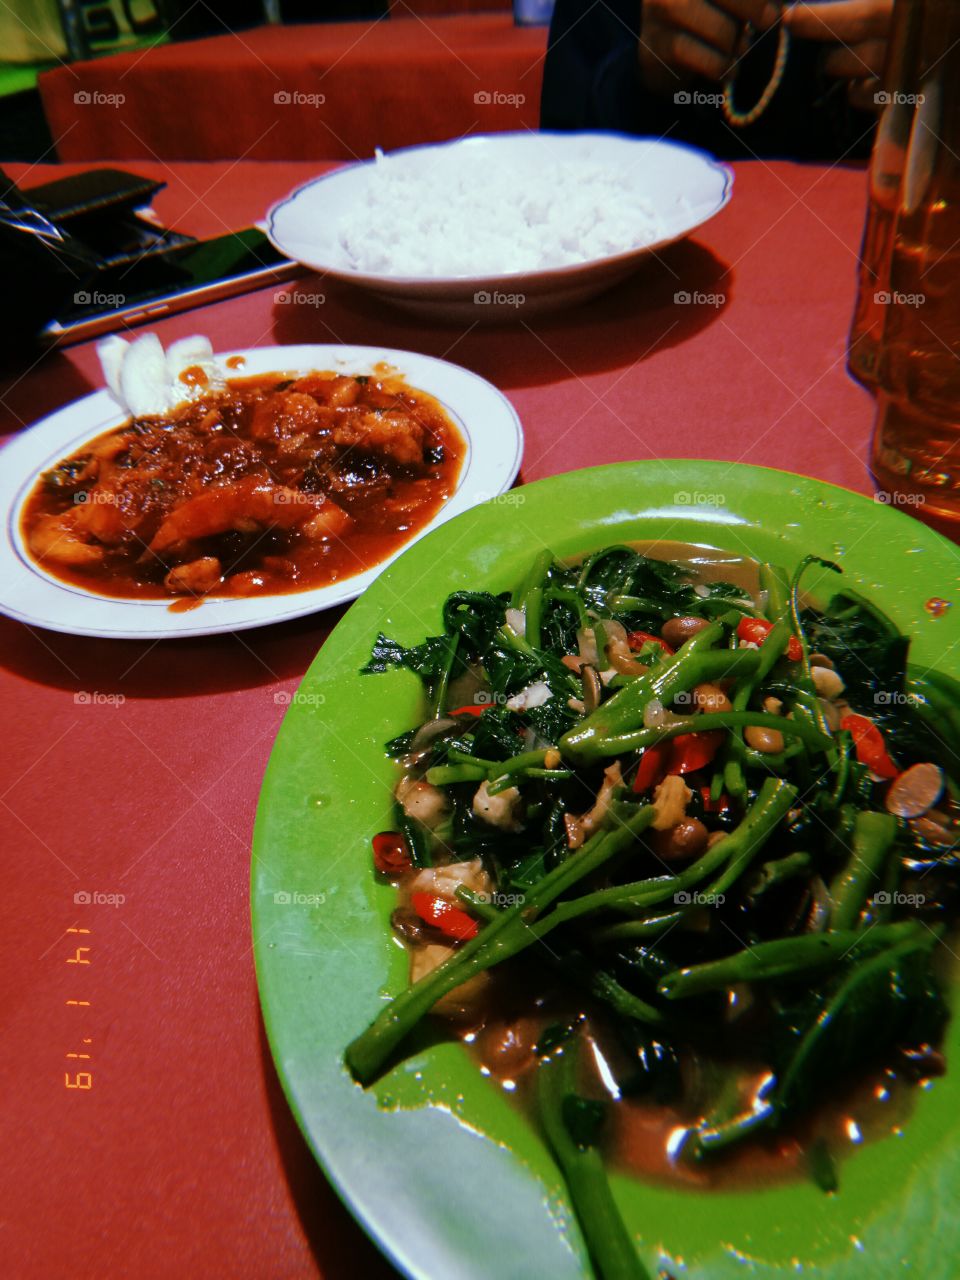 the seafood and water spinach is very nice